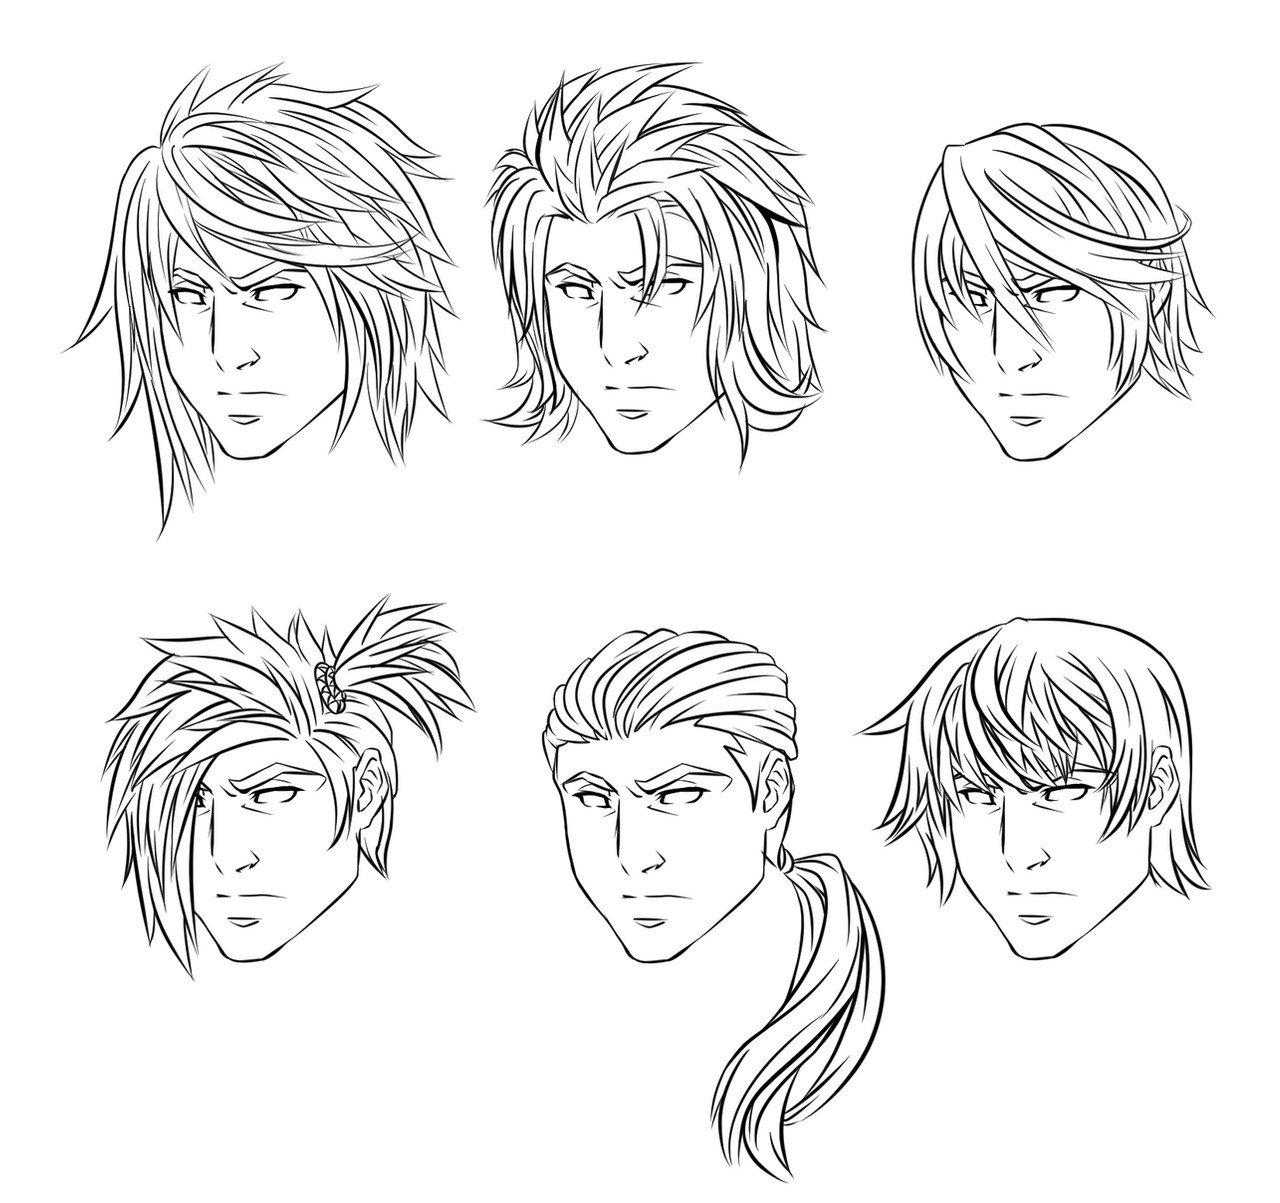 Anime Guy Hairstyles
 Anime Male Hairstyles by CrimsonCypher on DeviantArt